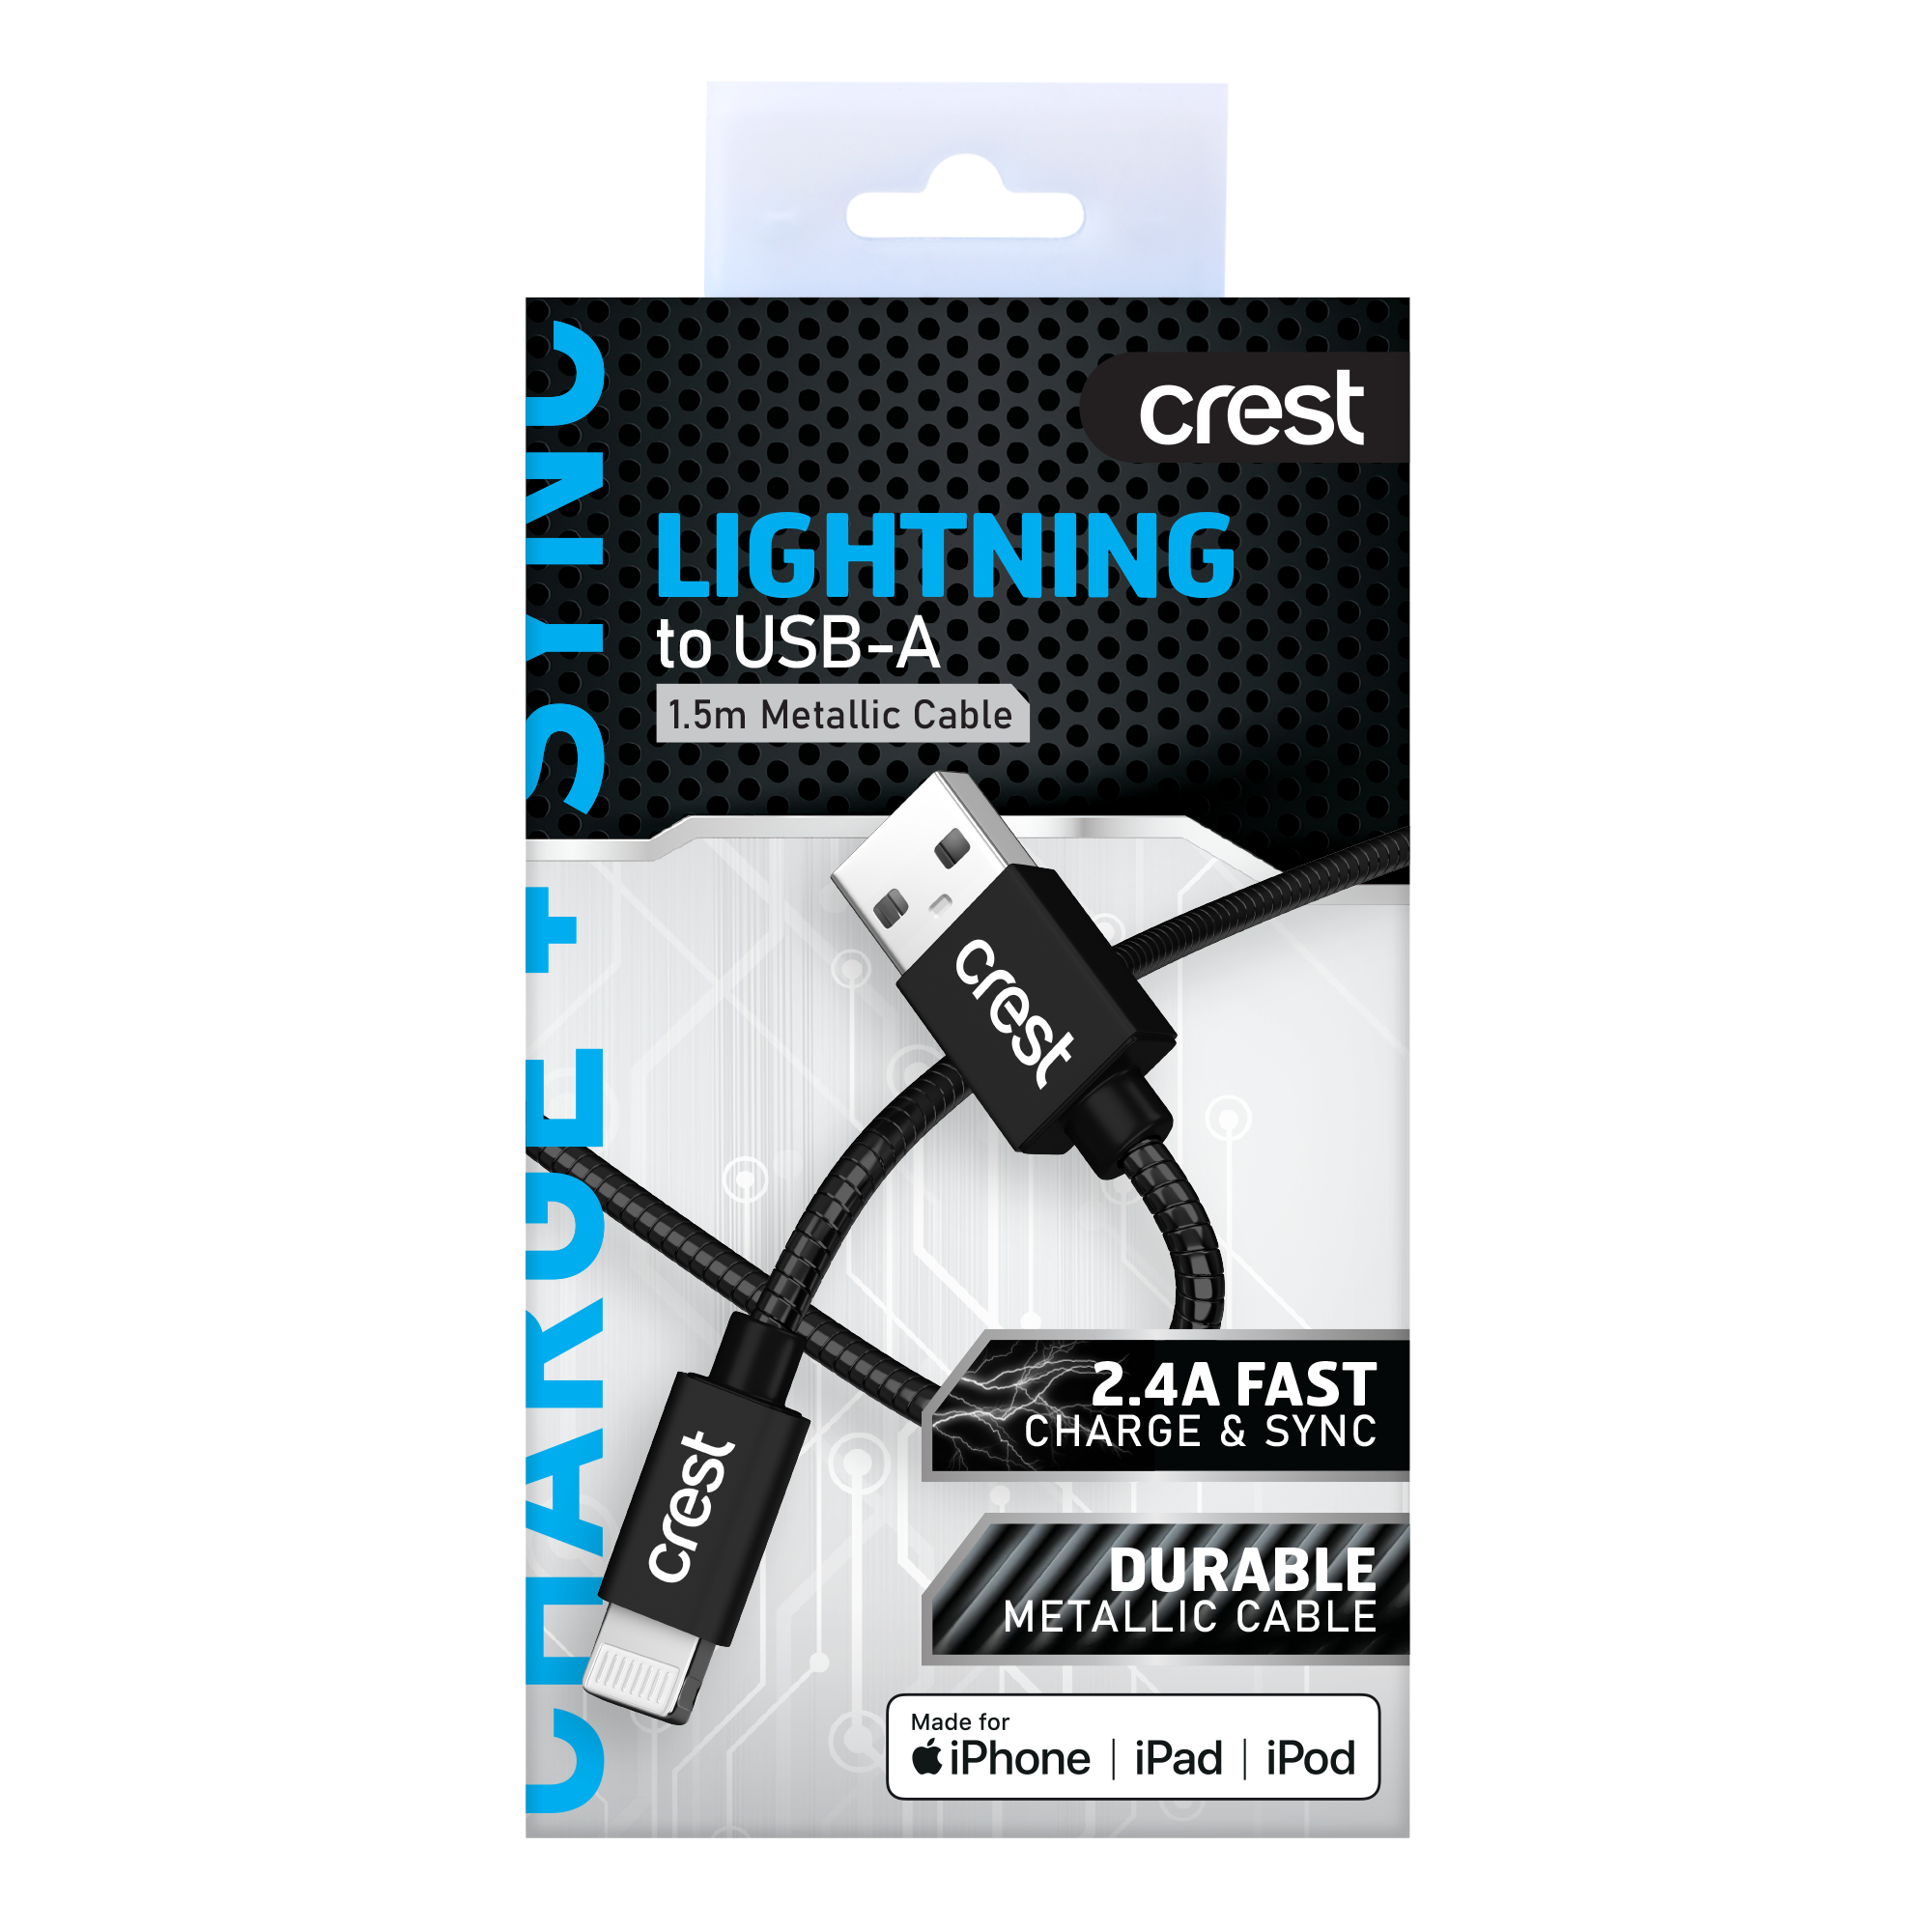 Lightning to USB-A Steel Cable 1.5M - Black